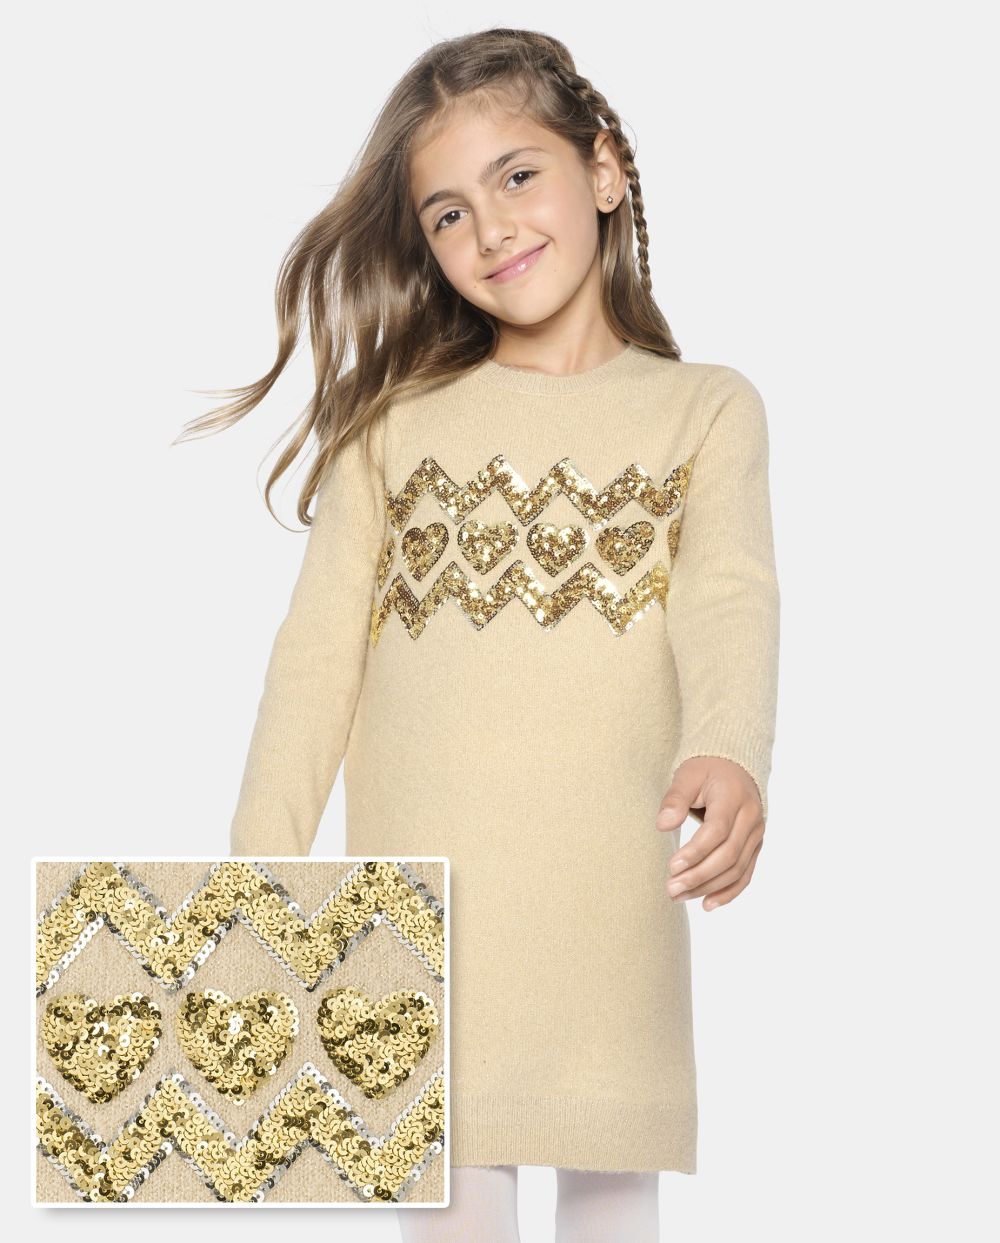 Tall Girls Zig Zag Print Sequined Sweater Crew Neck Above the Knee Long Sleeves Dress